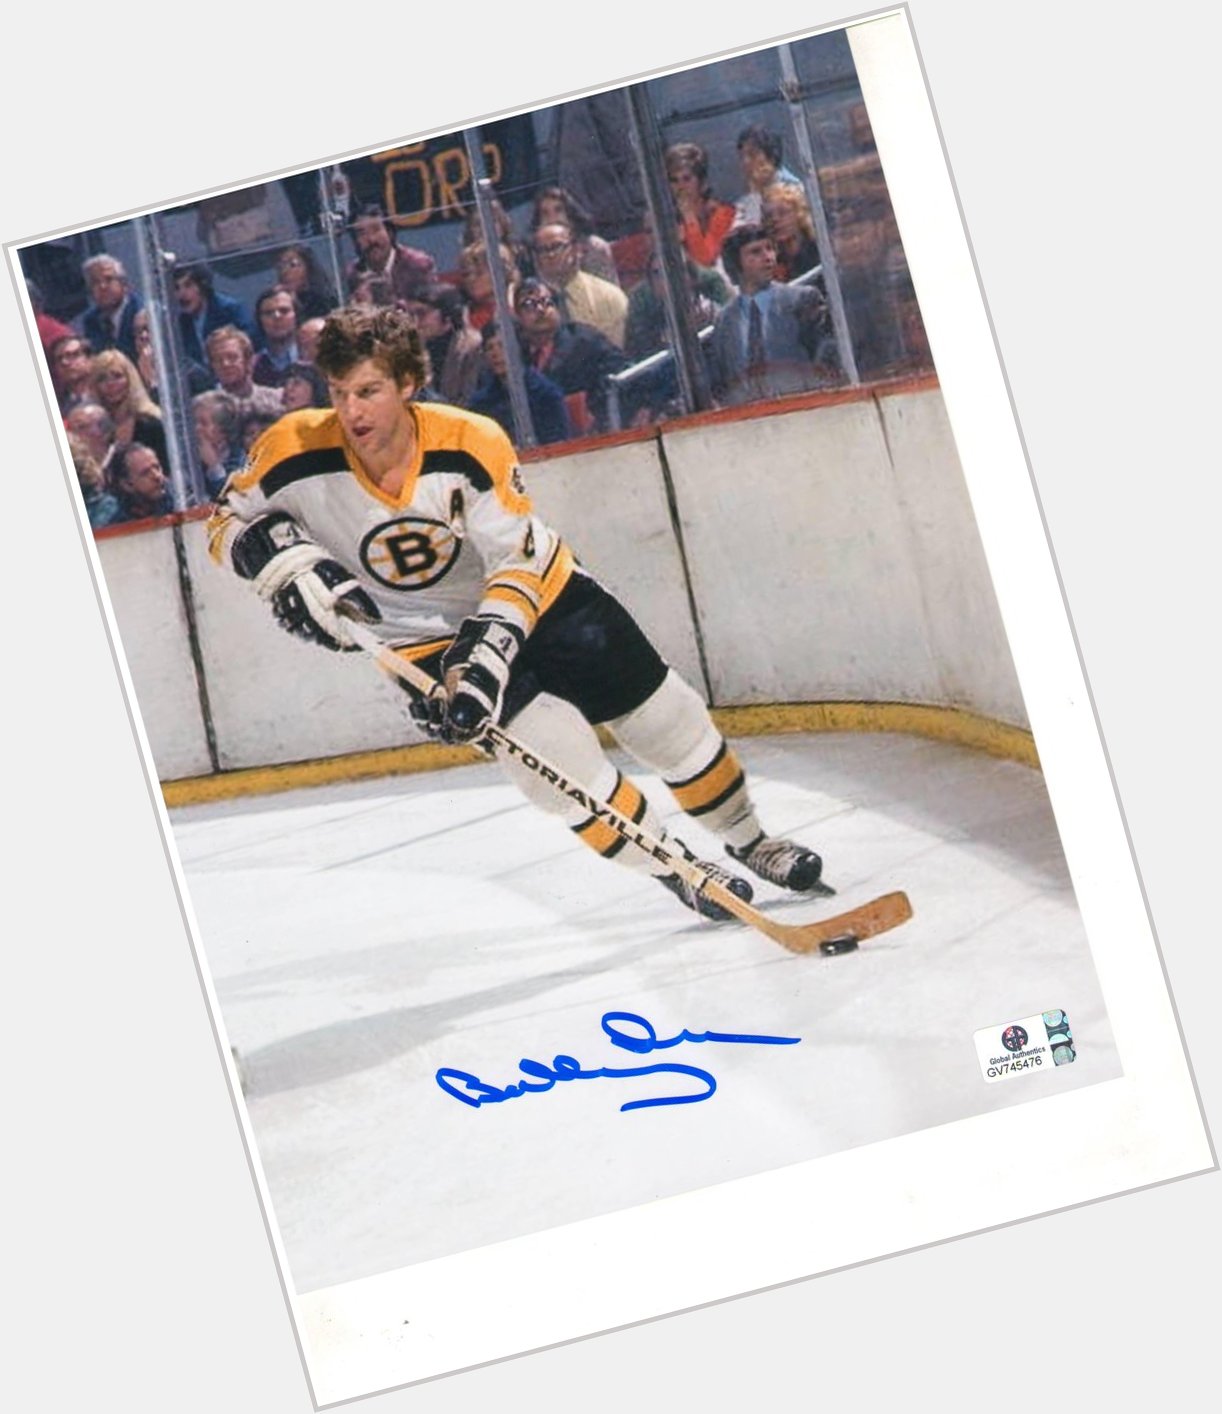 Happy birthday to the greatest hockey player in all of recorded history...
Number 4! Bobby Orr!
67 years old today! 